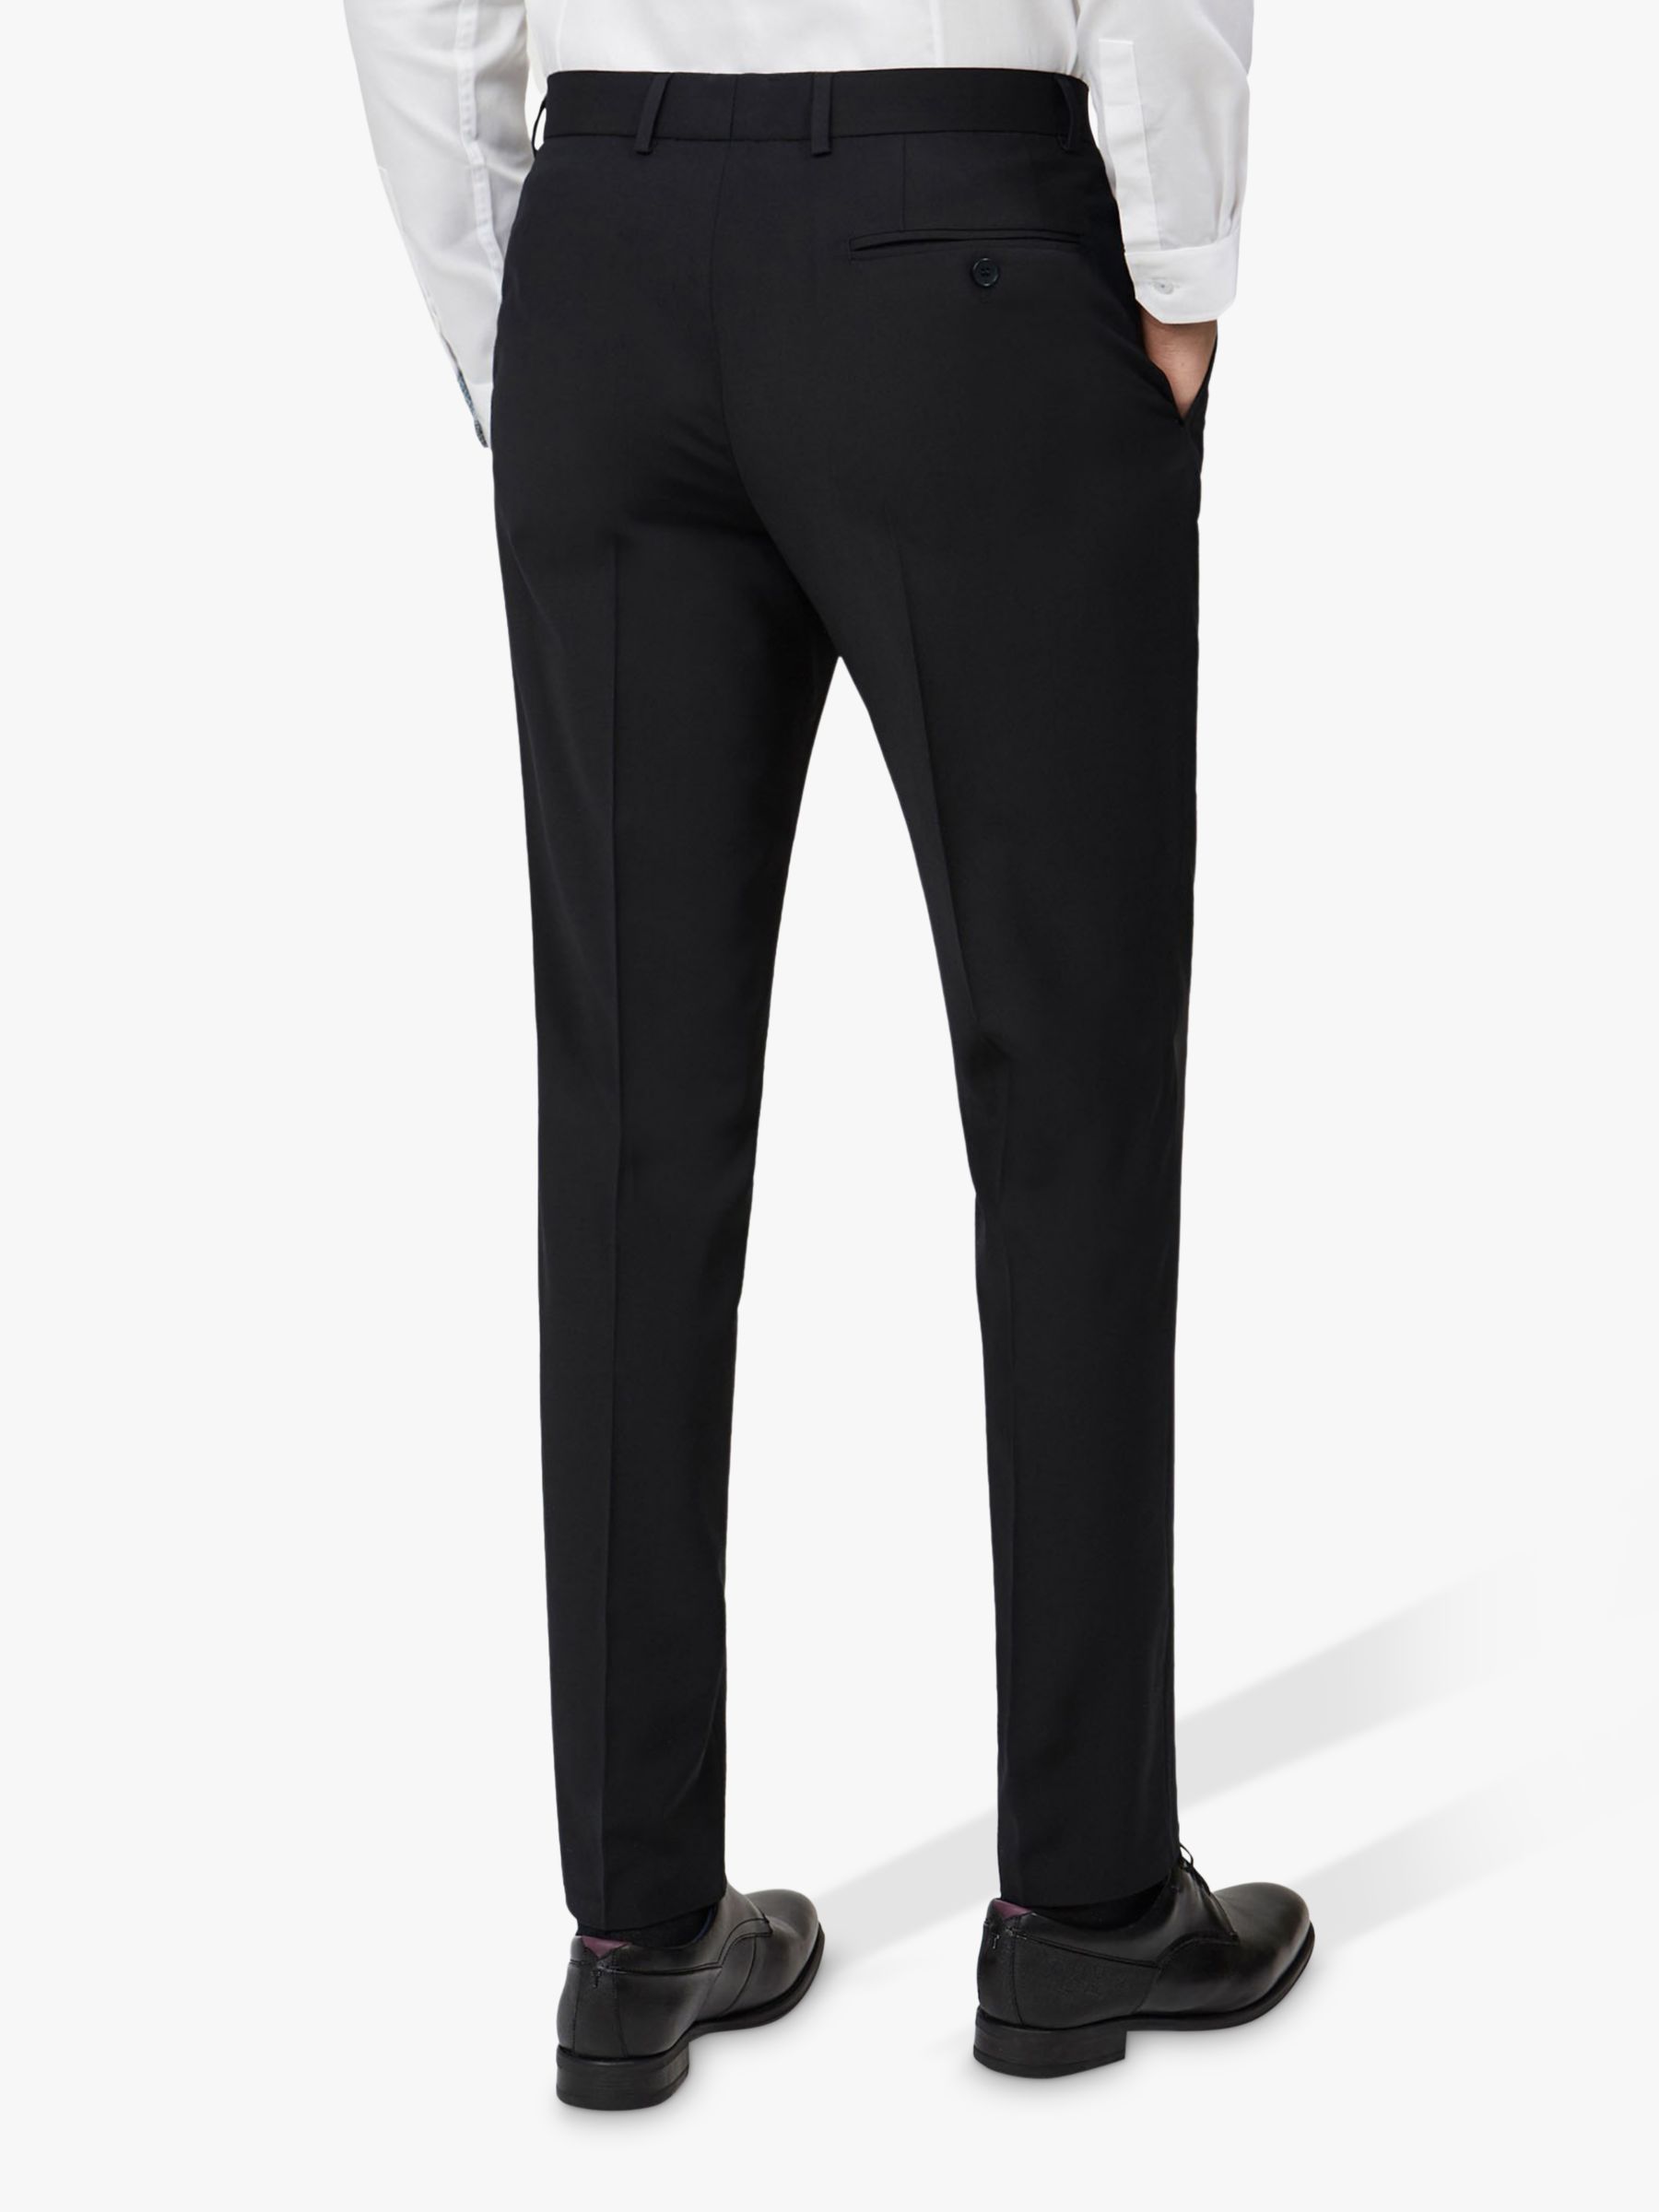 Ted Baker Panama Wool Blend Suit Trousers, Black, 32S